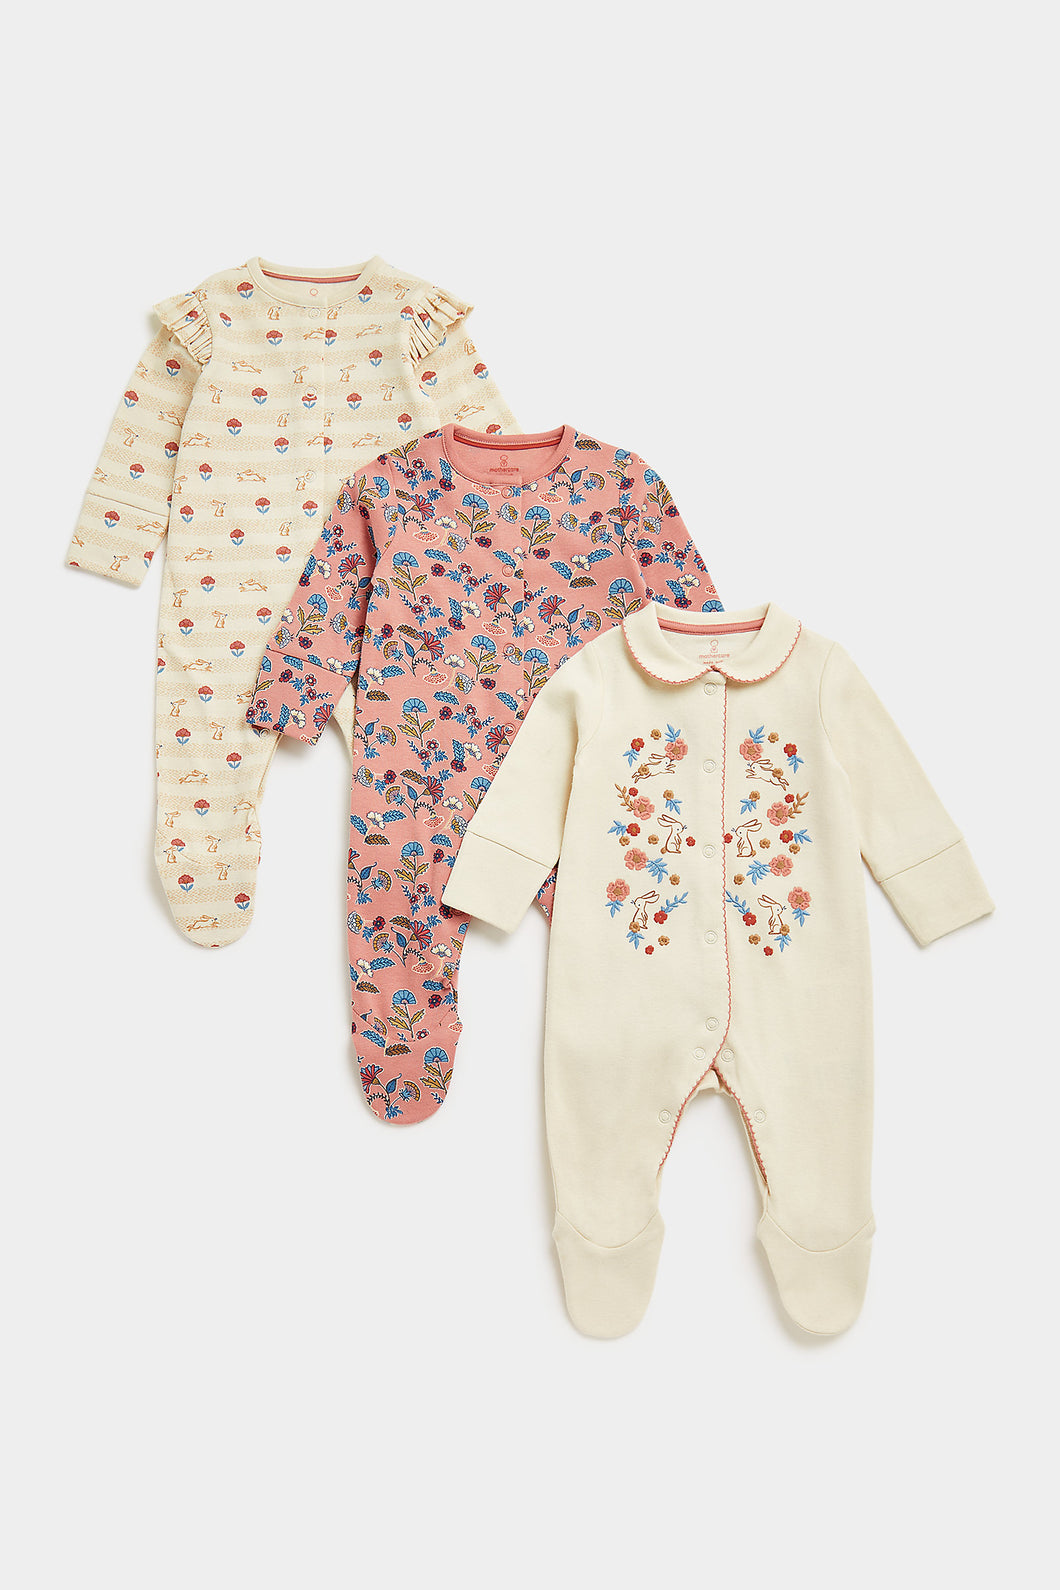 Mothercare Sleepsuit - 3 Pack